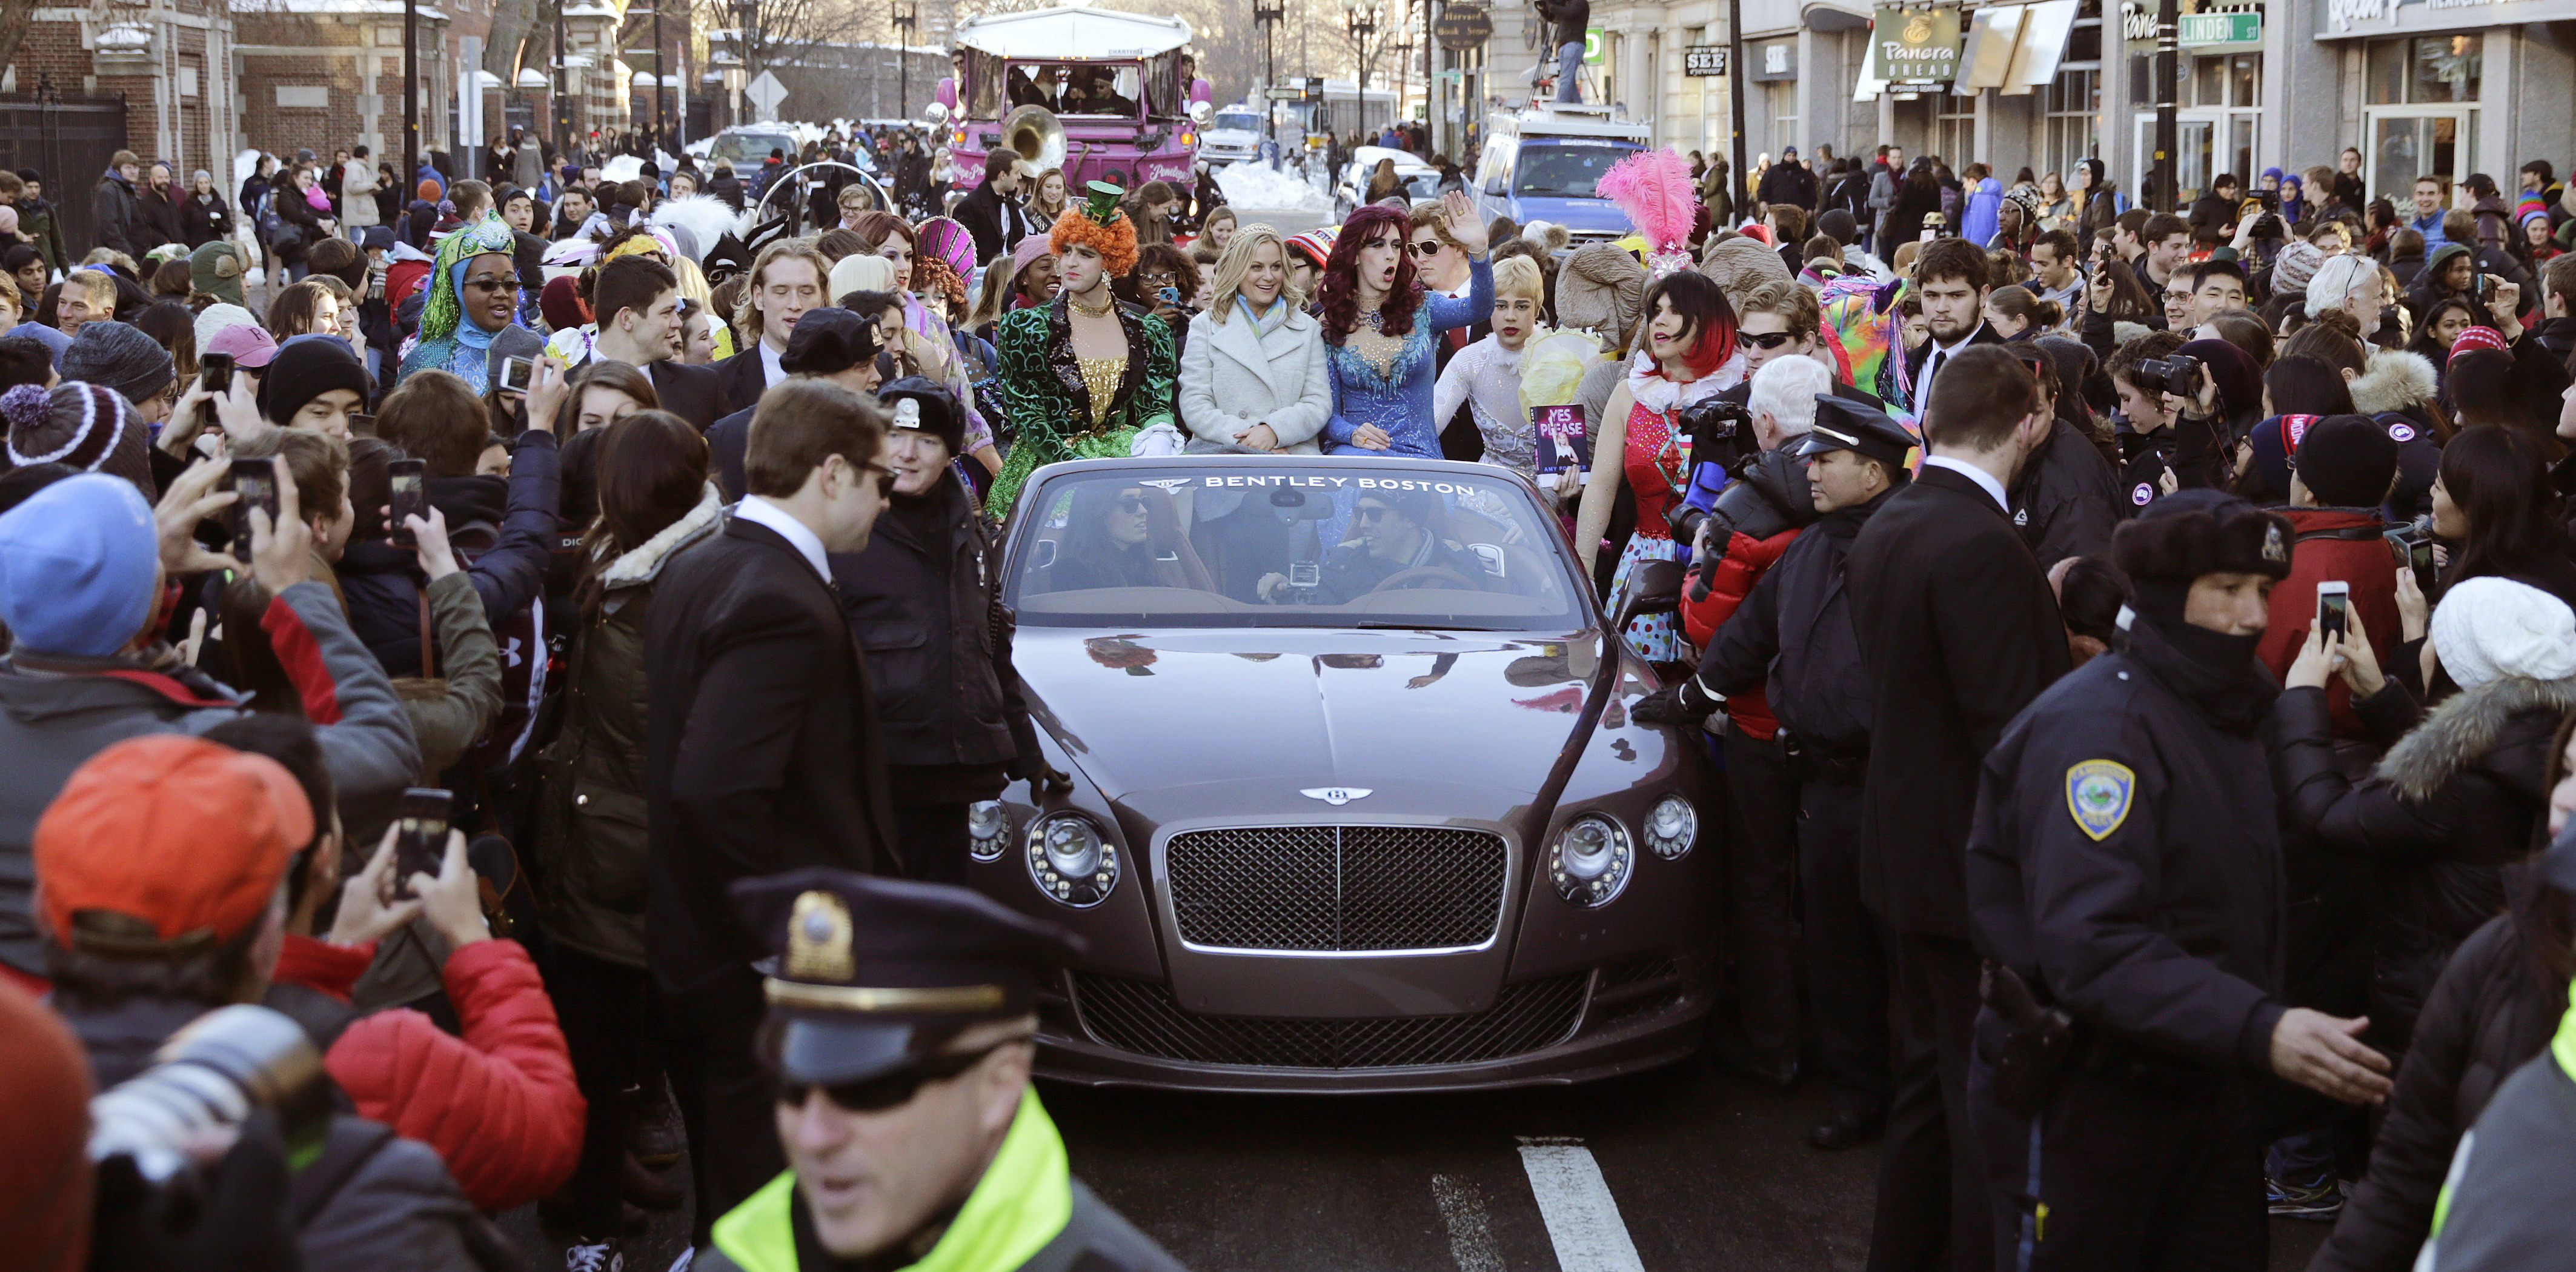 Actress Amy Poehler, center, sits with Jason Hellerstein, left, and Sam Clark, who are dressed in drag, as she rides in a convertible through Harvard Square in Cambridge, Mass., Thursday Jan. 29, 2015. Poehler was honored as "Woman of the Year" by the Hasty Pudding Theatricals at Harvard University. (AP Photo/Charles Krupa)